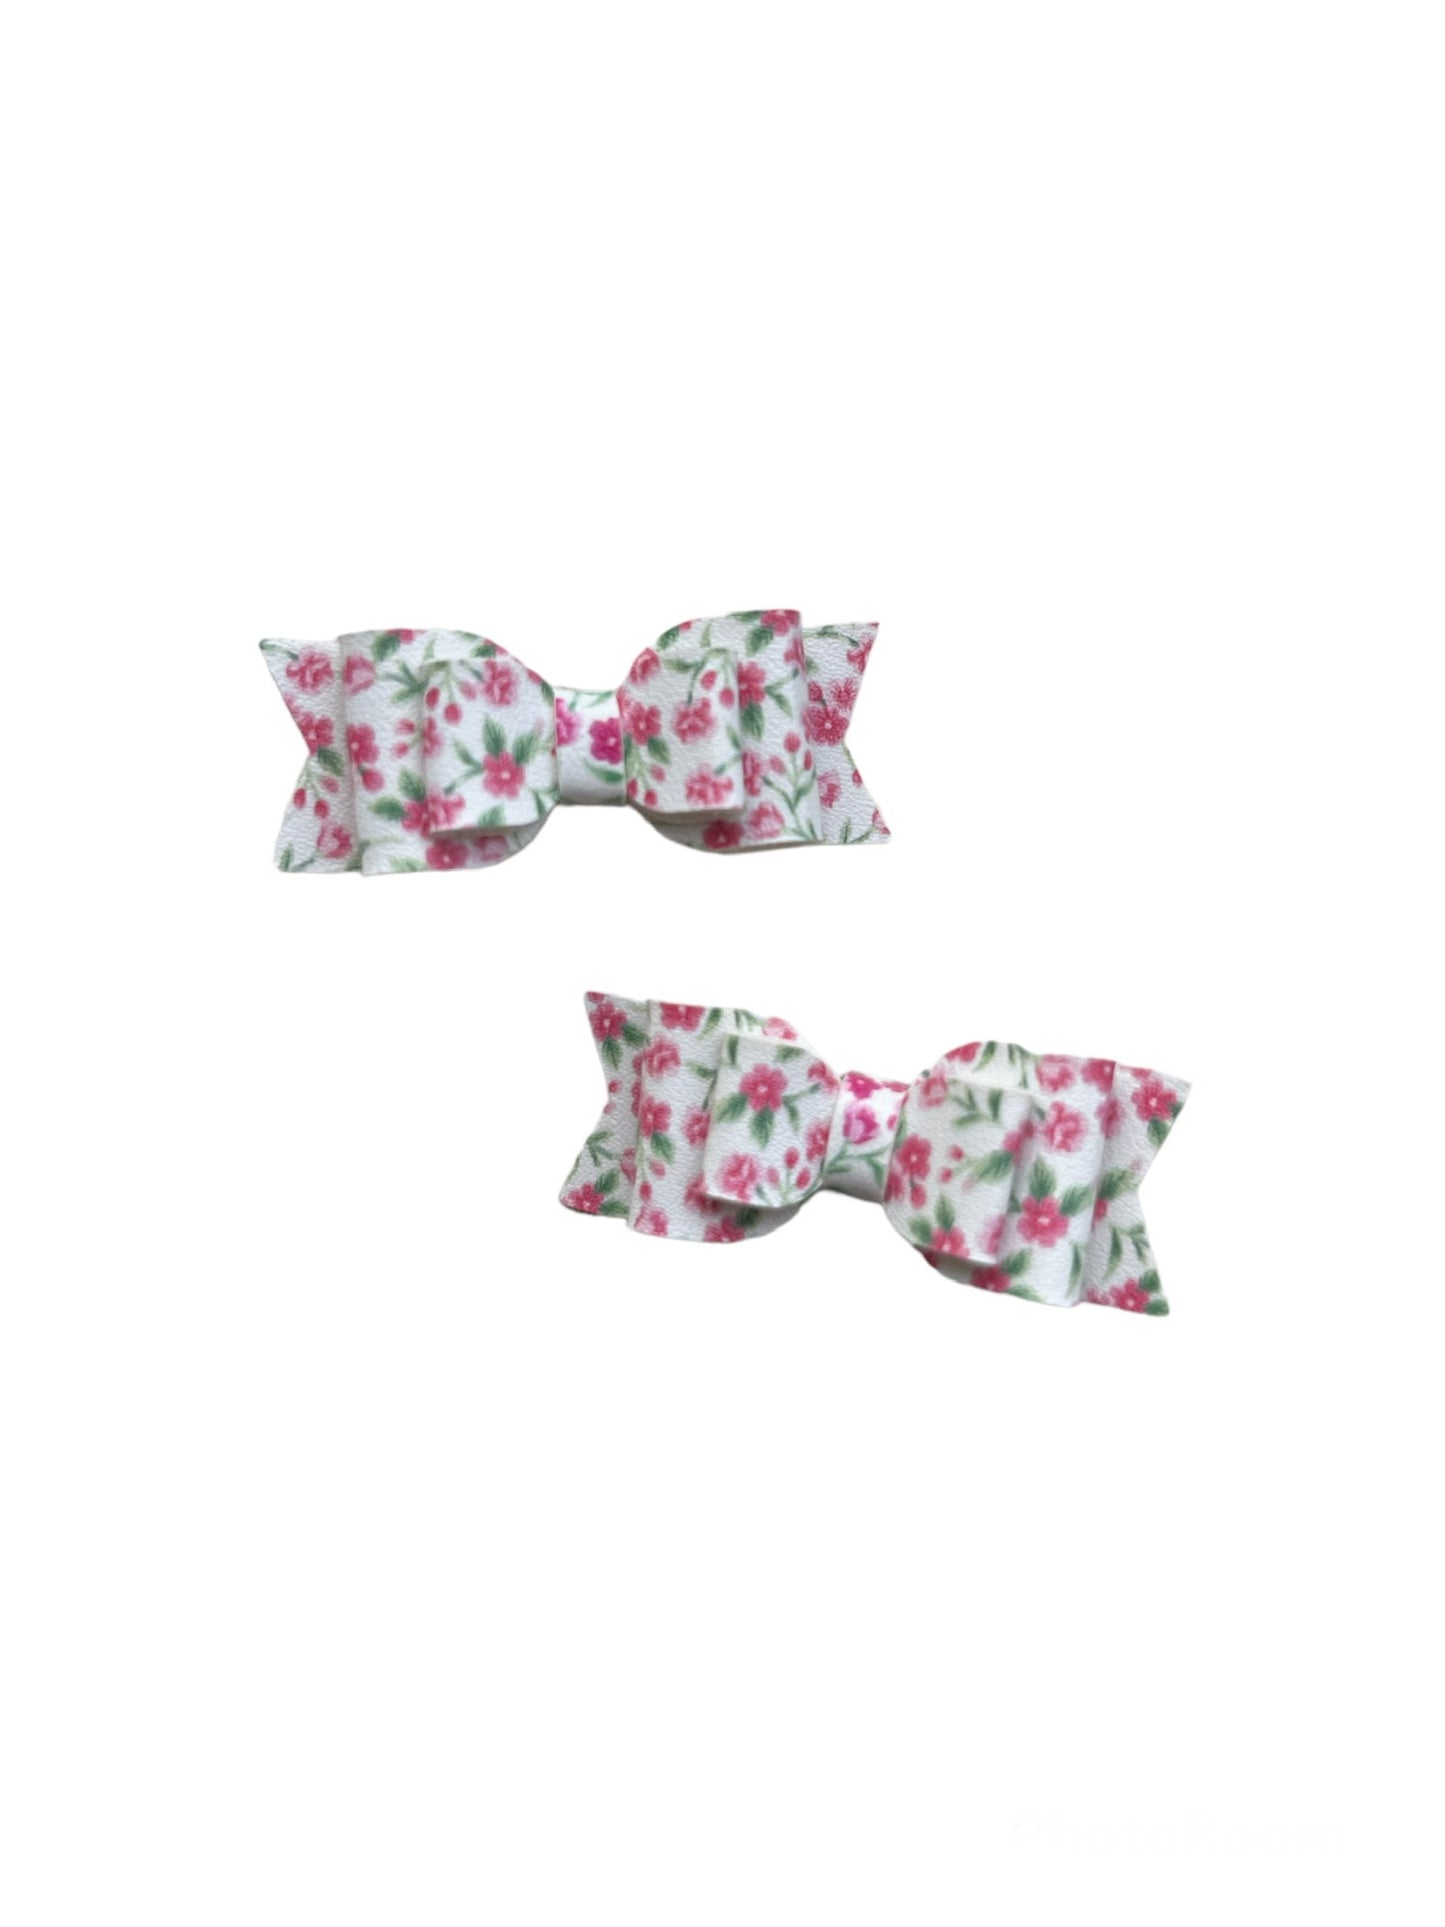 Rose Floral Micro Pigtail Bows!